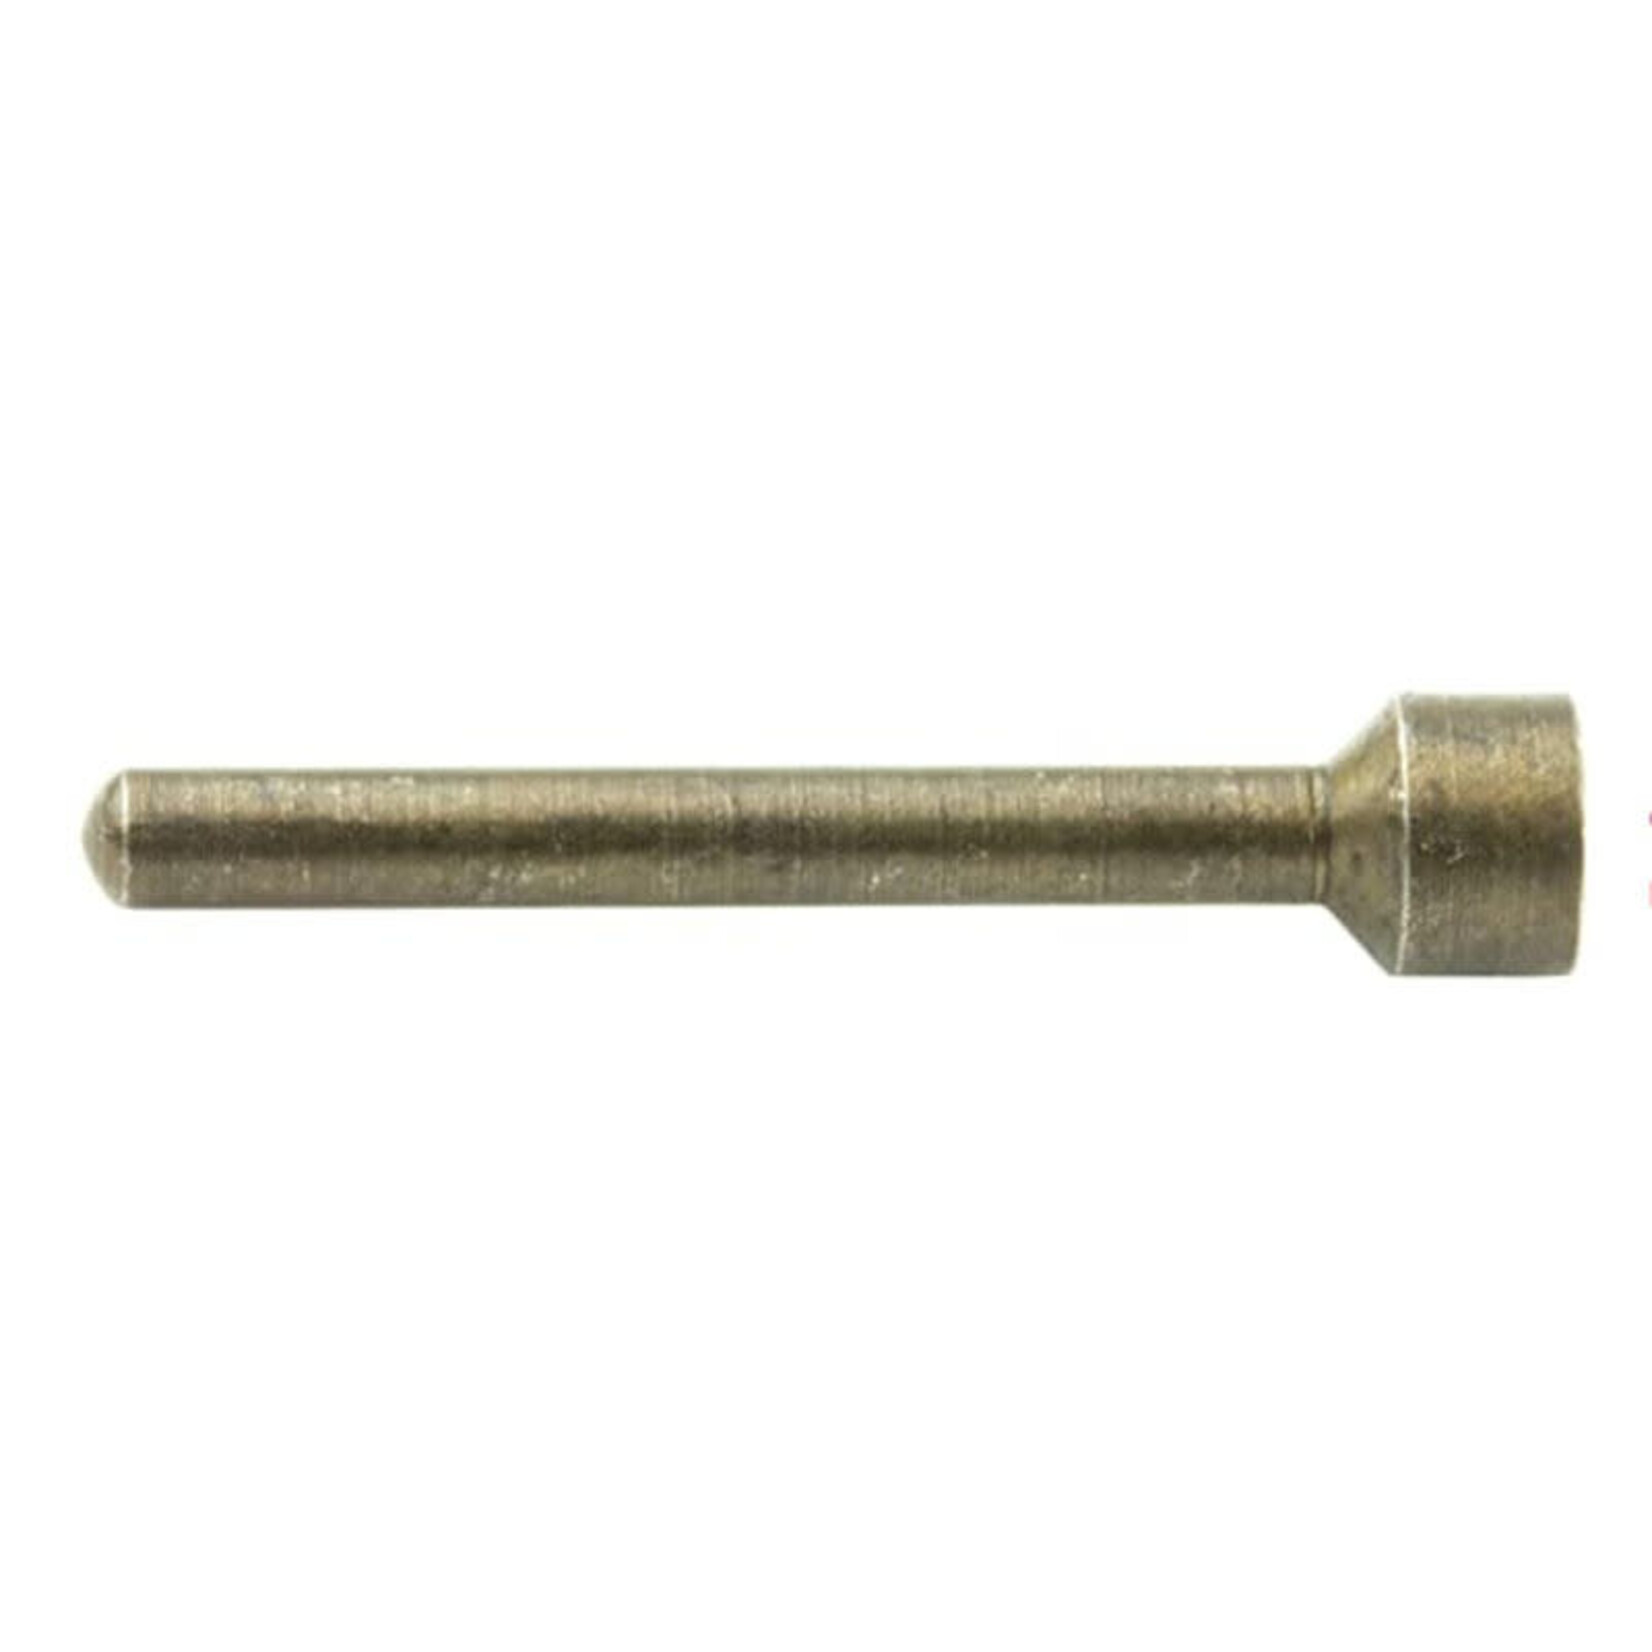 RCBS RCBS Decapping Pin - Headed - Single